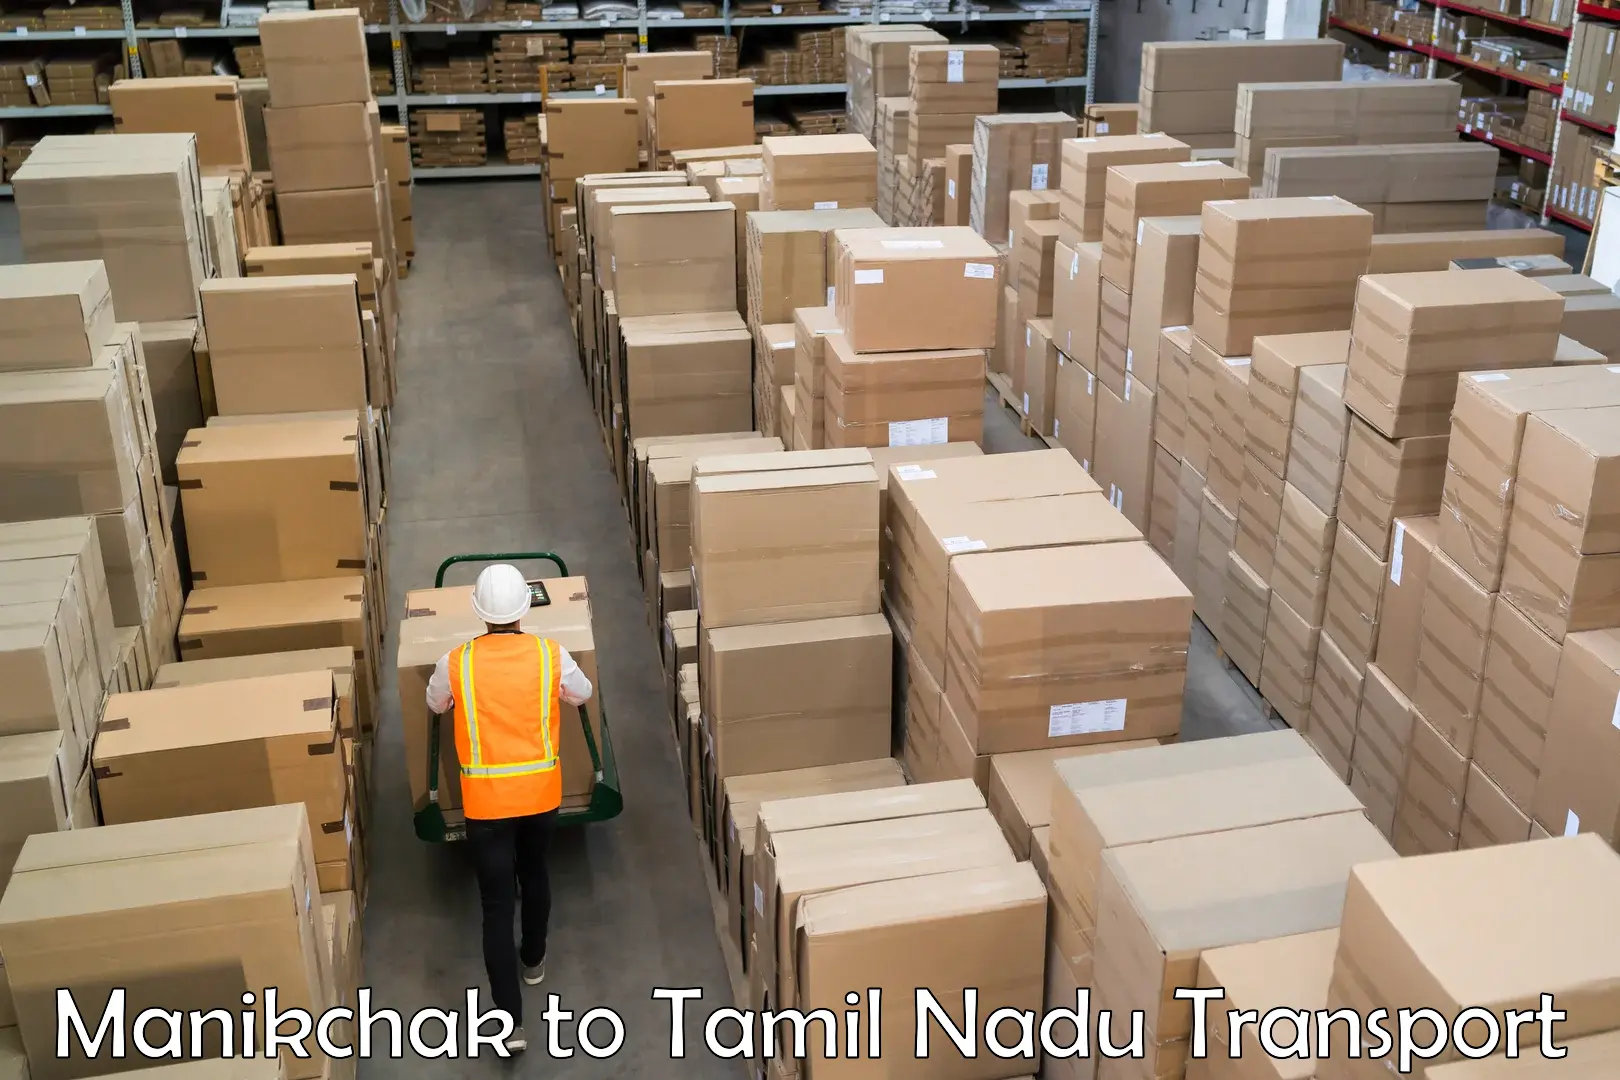 Parcel transport services Manikchak to Vellore Institute of Technology